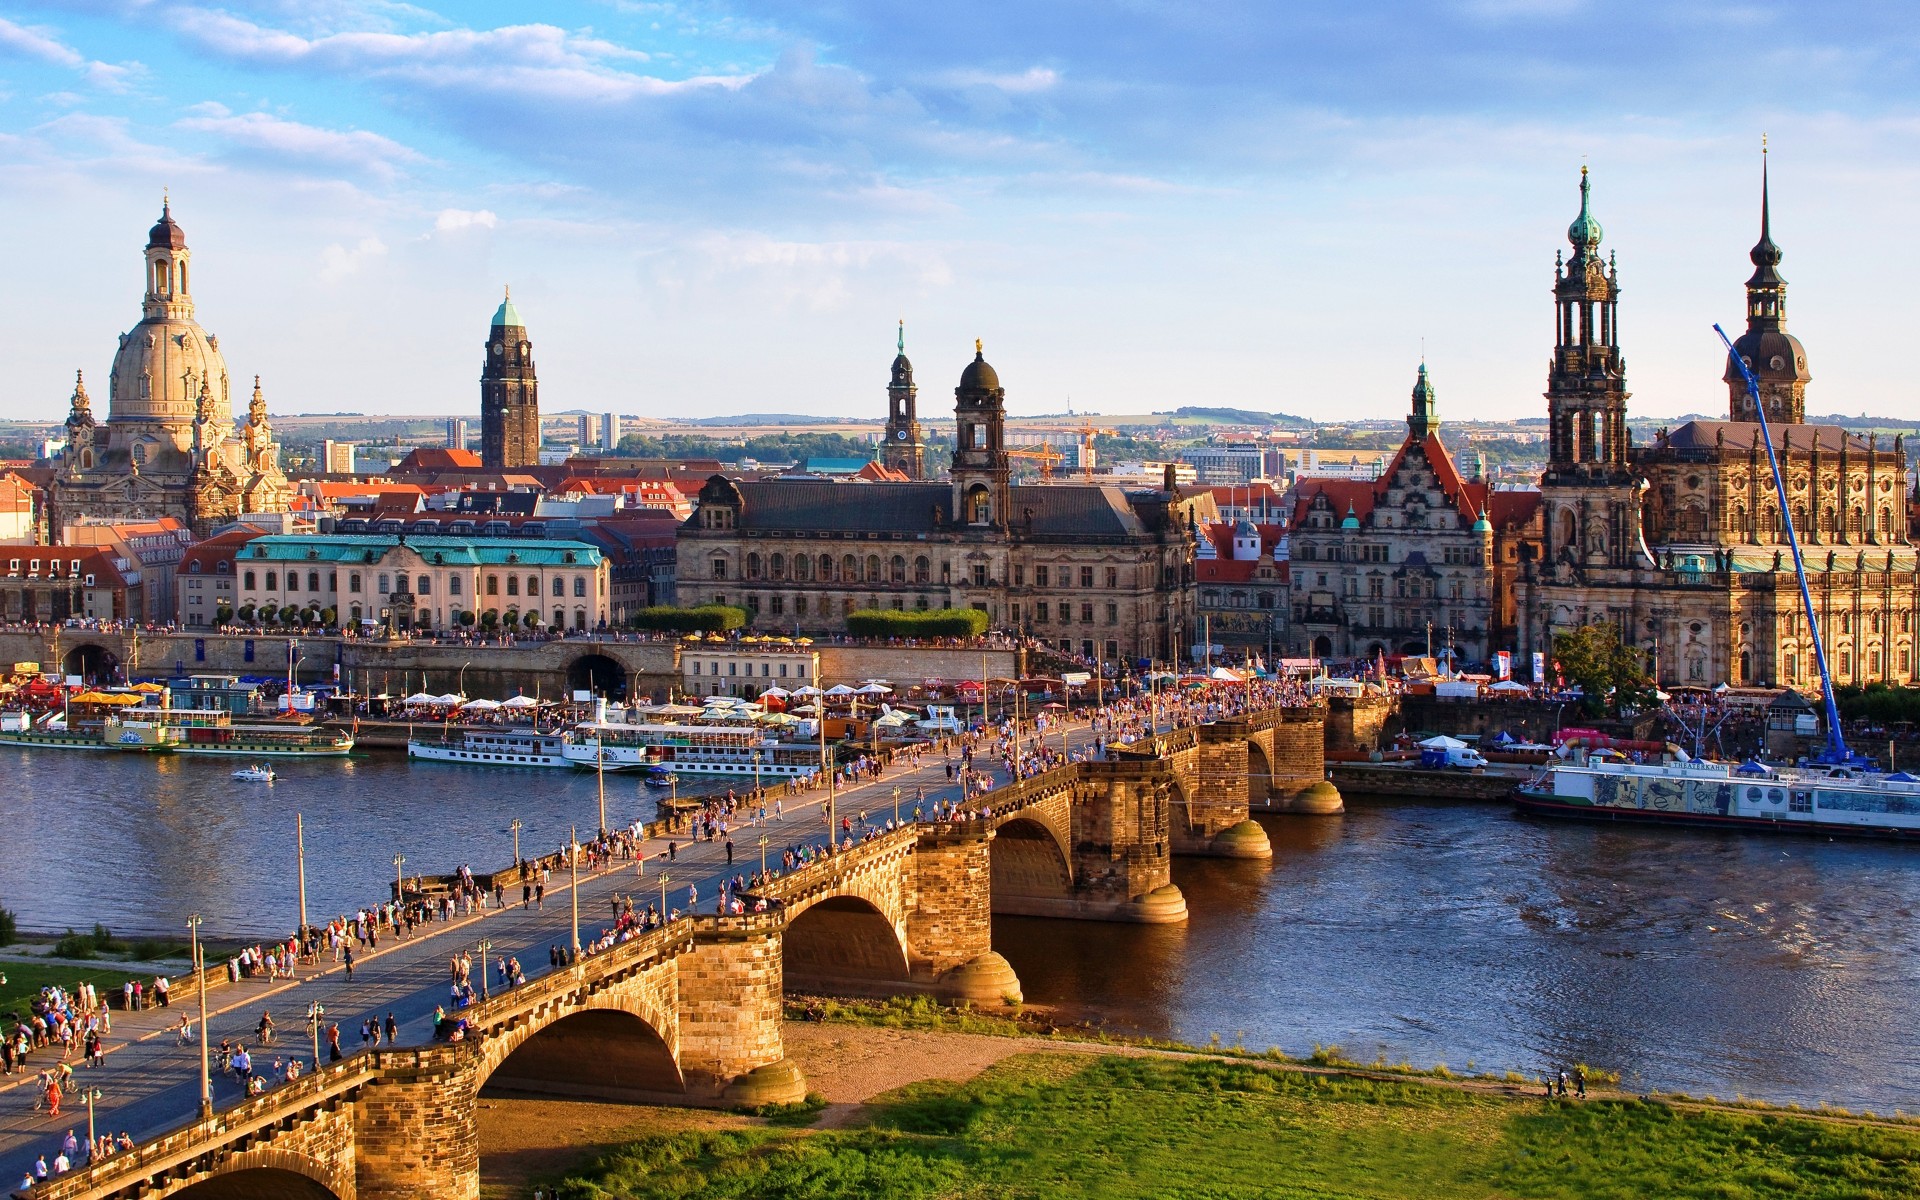 dresden, man made, architecture, boat, bridge, building, city, cityscape, germany, river, cities Full HD